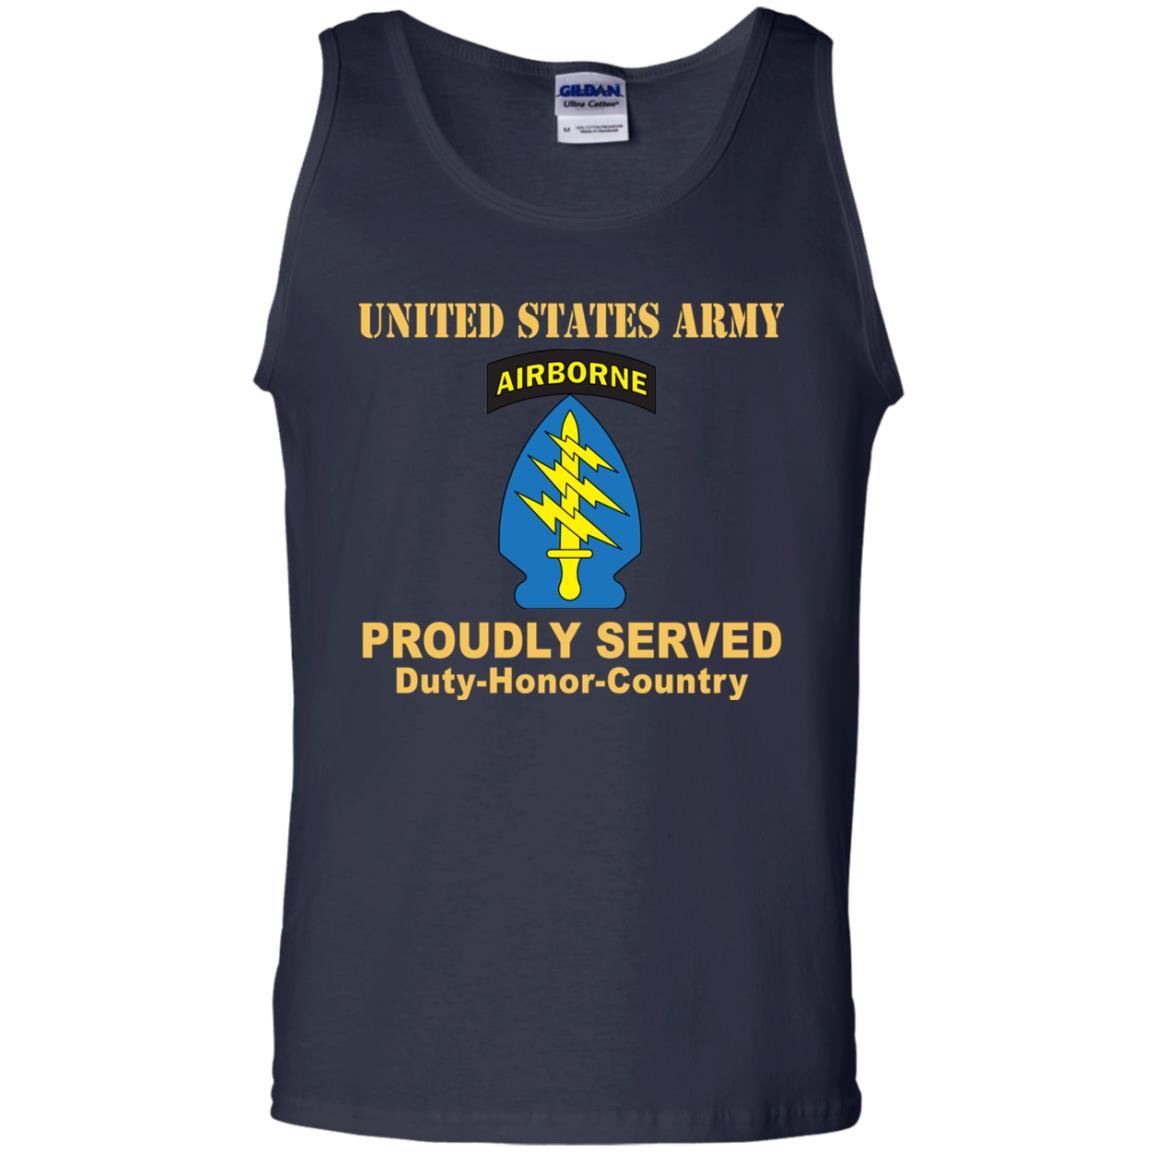 US ARMY SPECIAL FORCES GROUP CSIB- Proudly Served T-Shirt On Front For Men-TShirt-Army-Veterans Nation